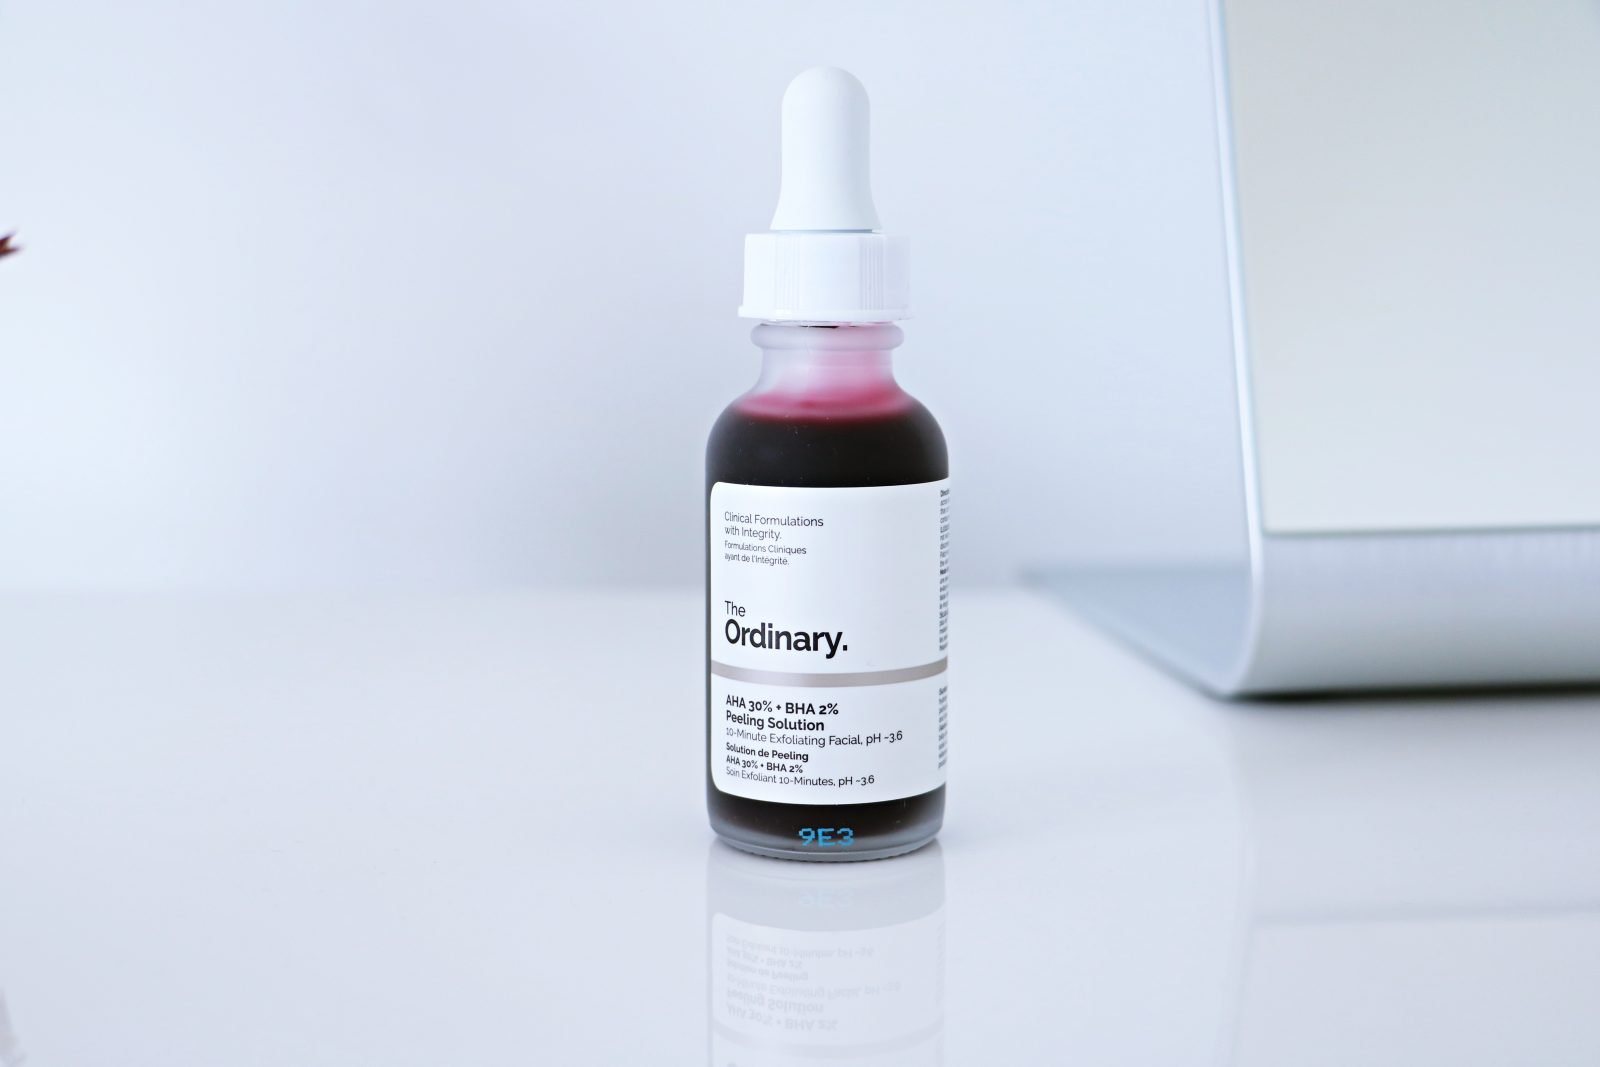 The Ordinary Peeling Solution Review